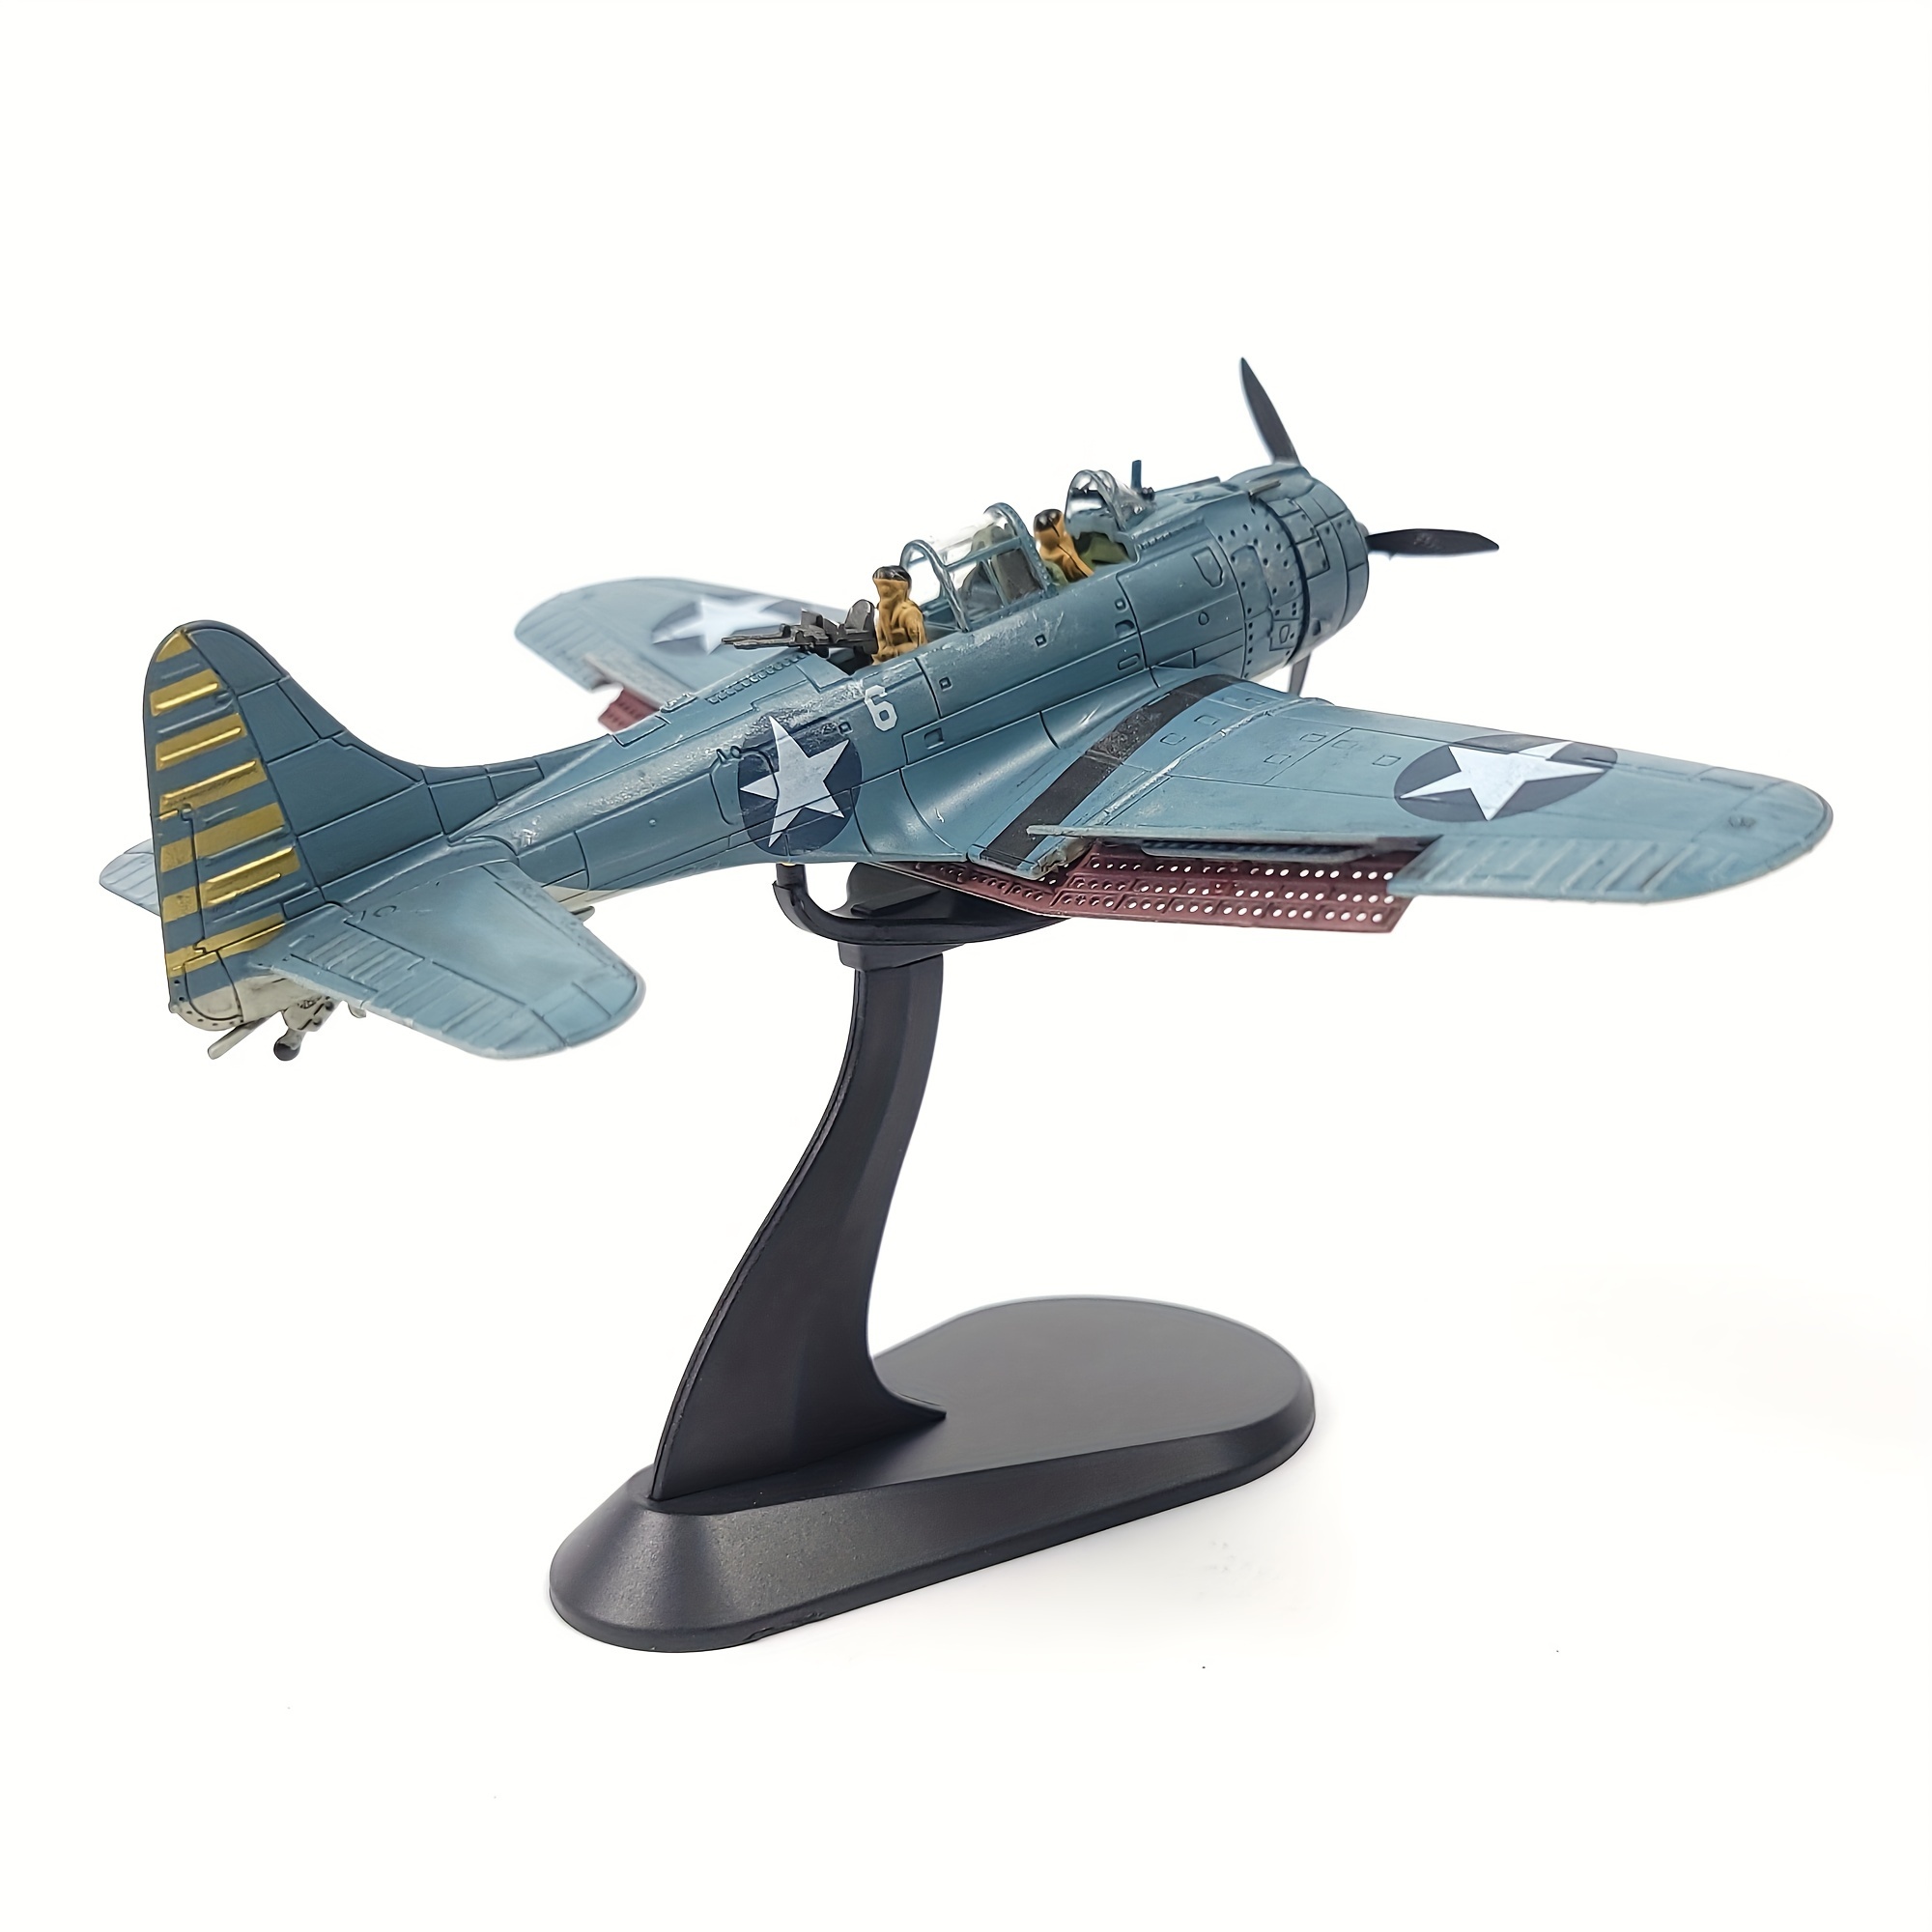 

1:72 Douglas Sbd Metal Airplane Model Kit Diecast Alloy Fighter Model Vintage Combat Plane Military Aircraft Collection For Display Or Gift